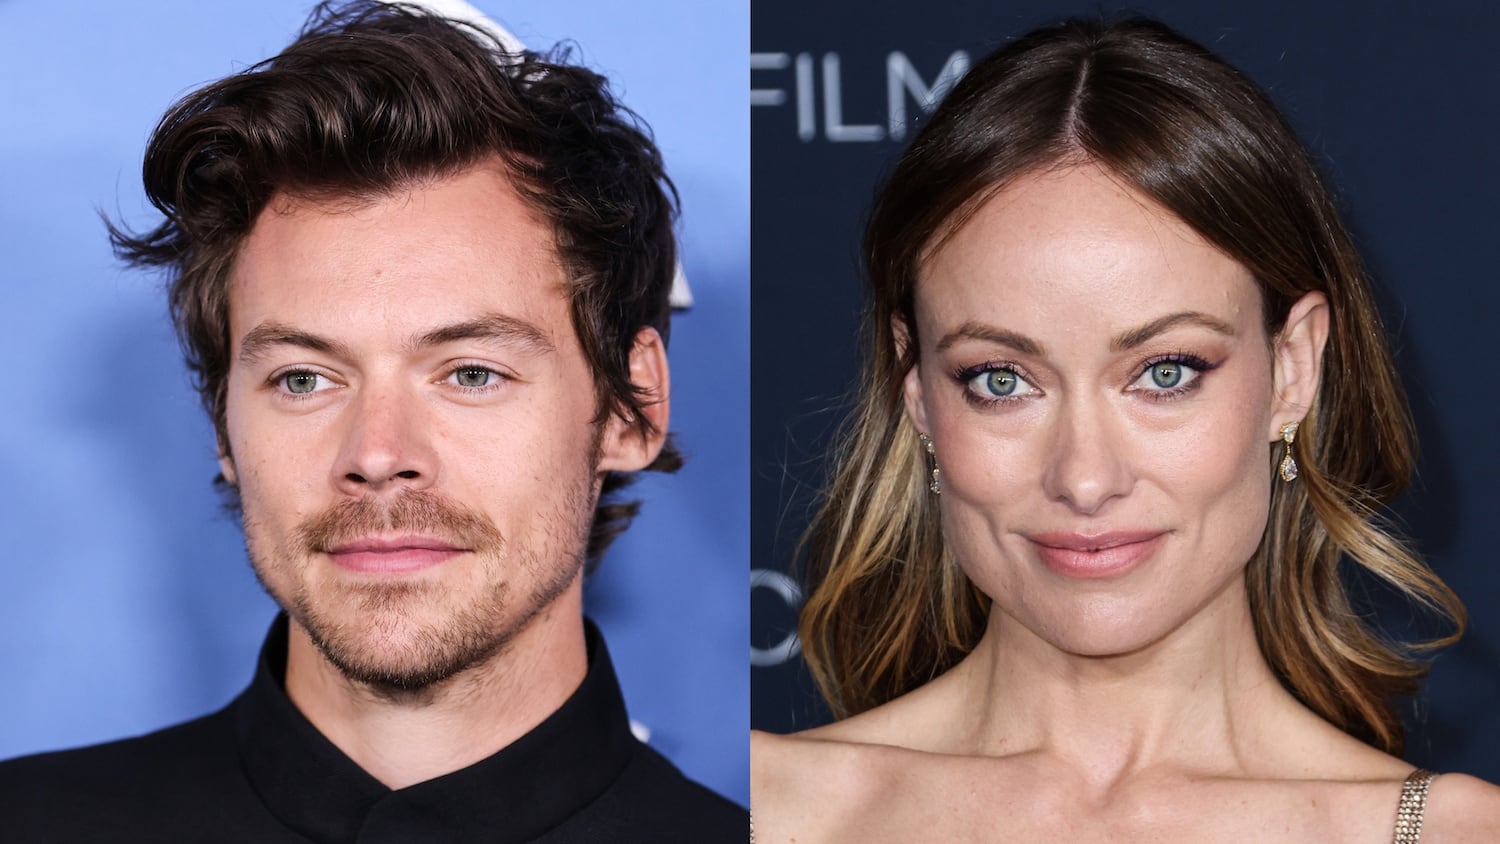 Harry Styles & Olivia Wilde Reportedly Break Up After Nearly 2 Years